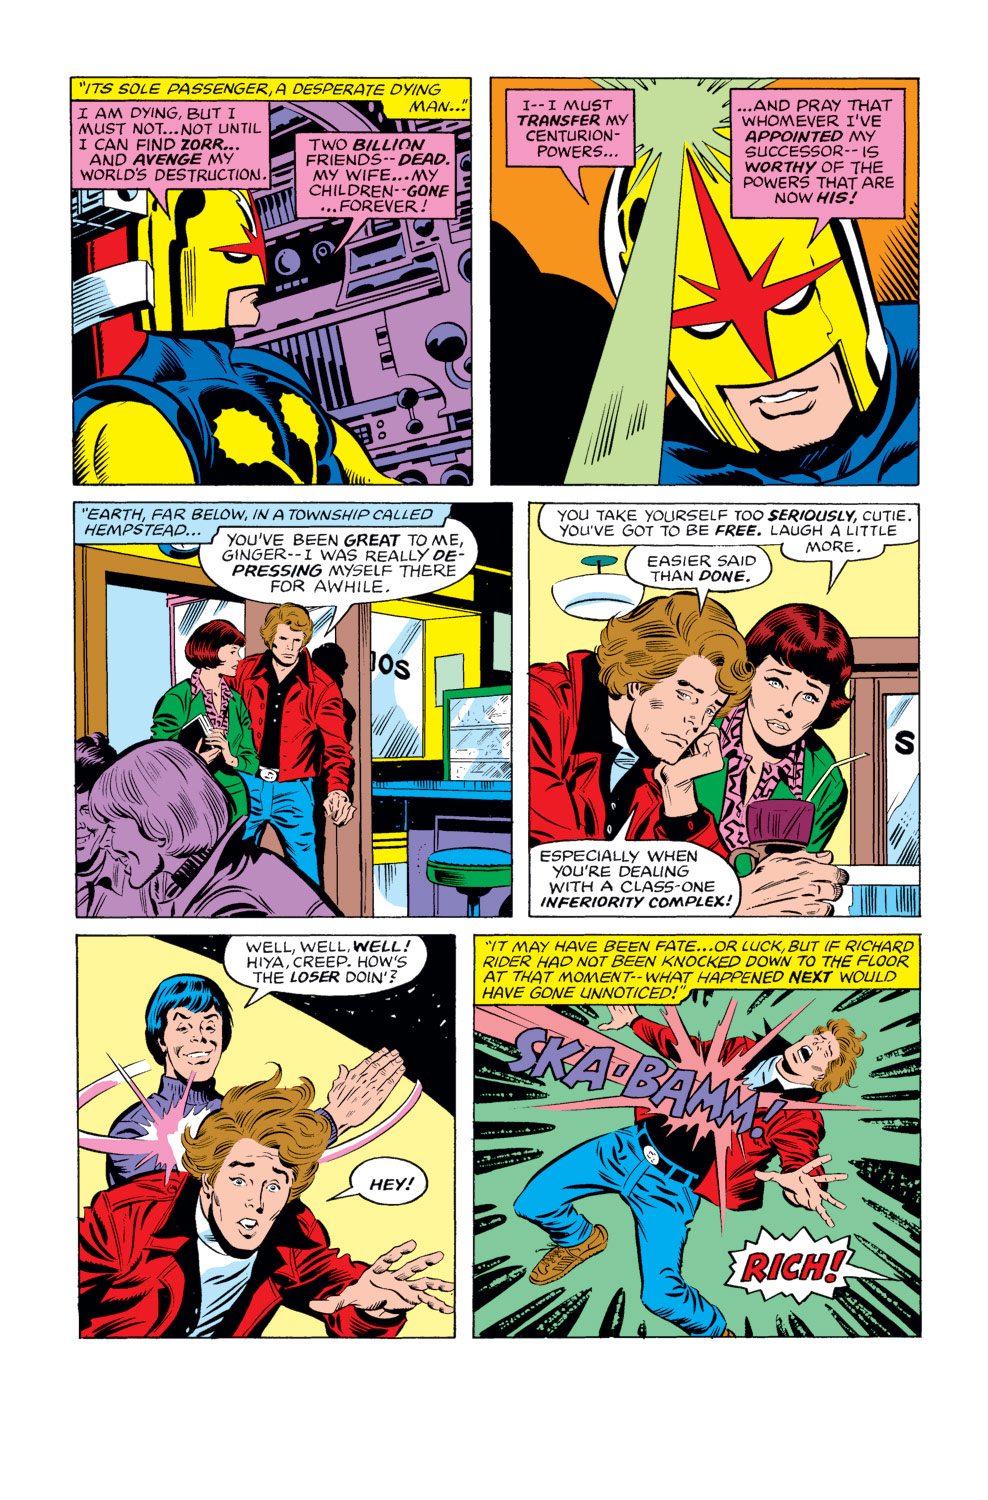 What If? (1977) issue 15 - Nova had been four other people - Page 3